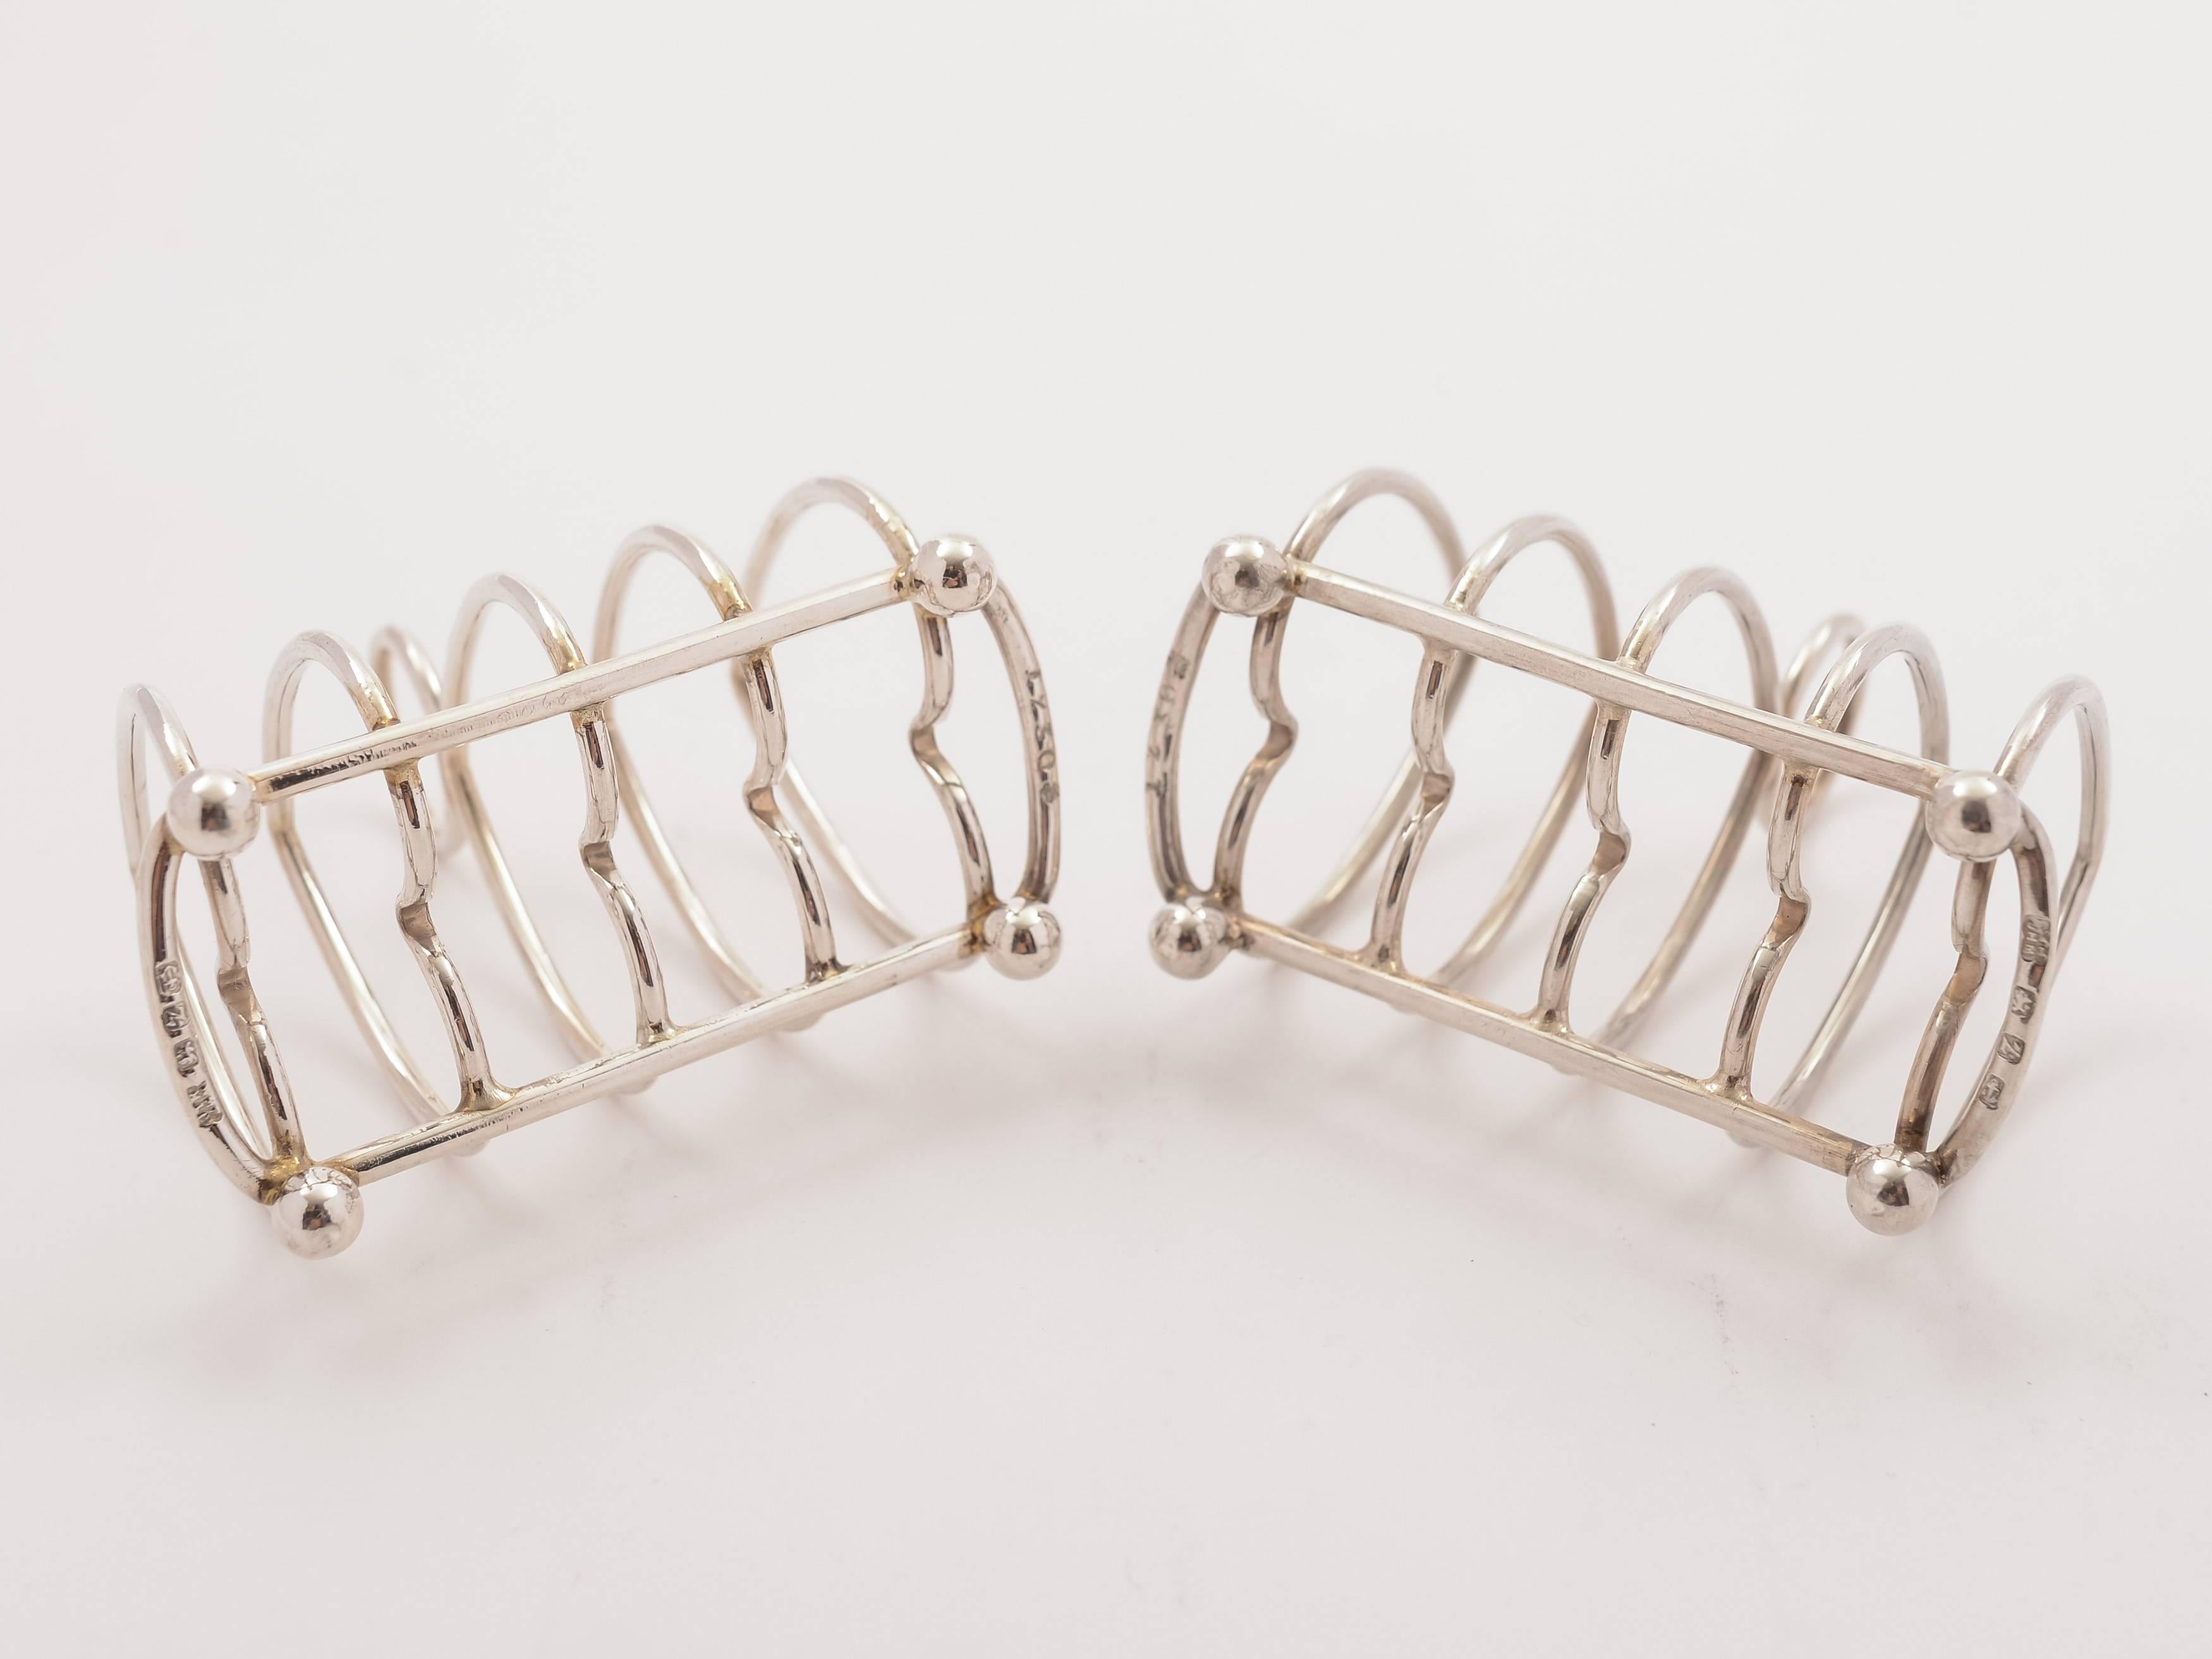 A fabulous pair of English Victorian silver caviar toast racks with heart shaped dividers and ring handle to top. Both stand of four ball feet. Hallmarked Birmingham 1899 and marked 'JTH over JHM' for the maker John Thomas Heath & John Hartshorne